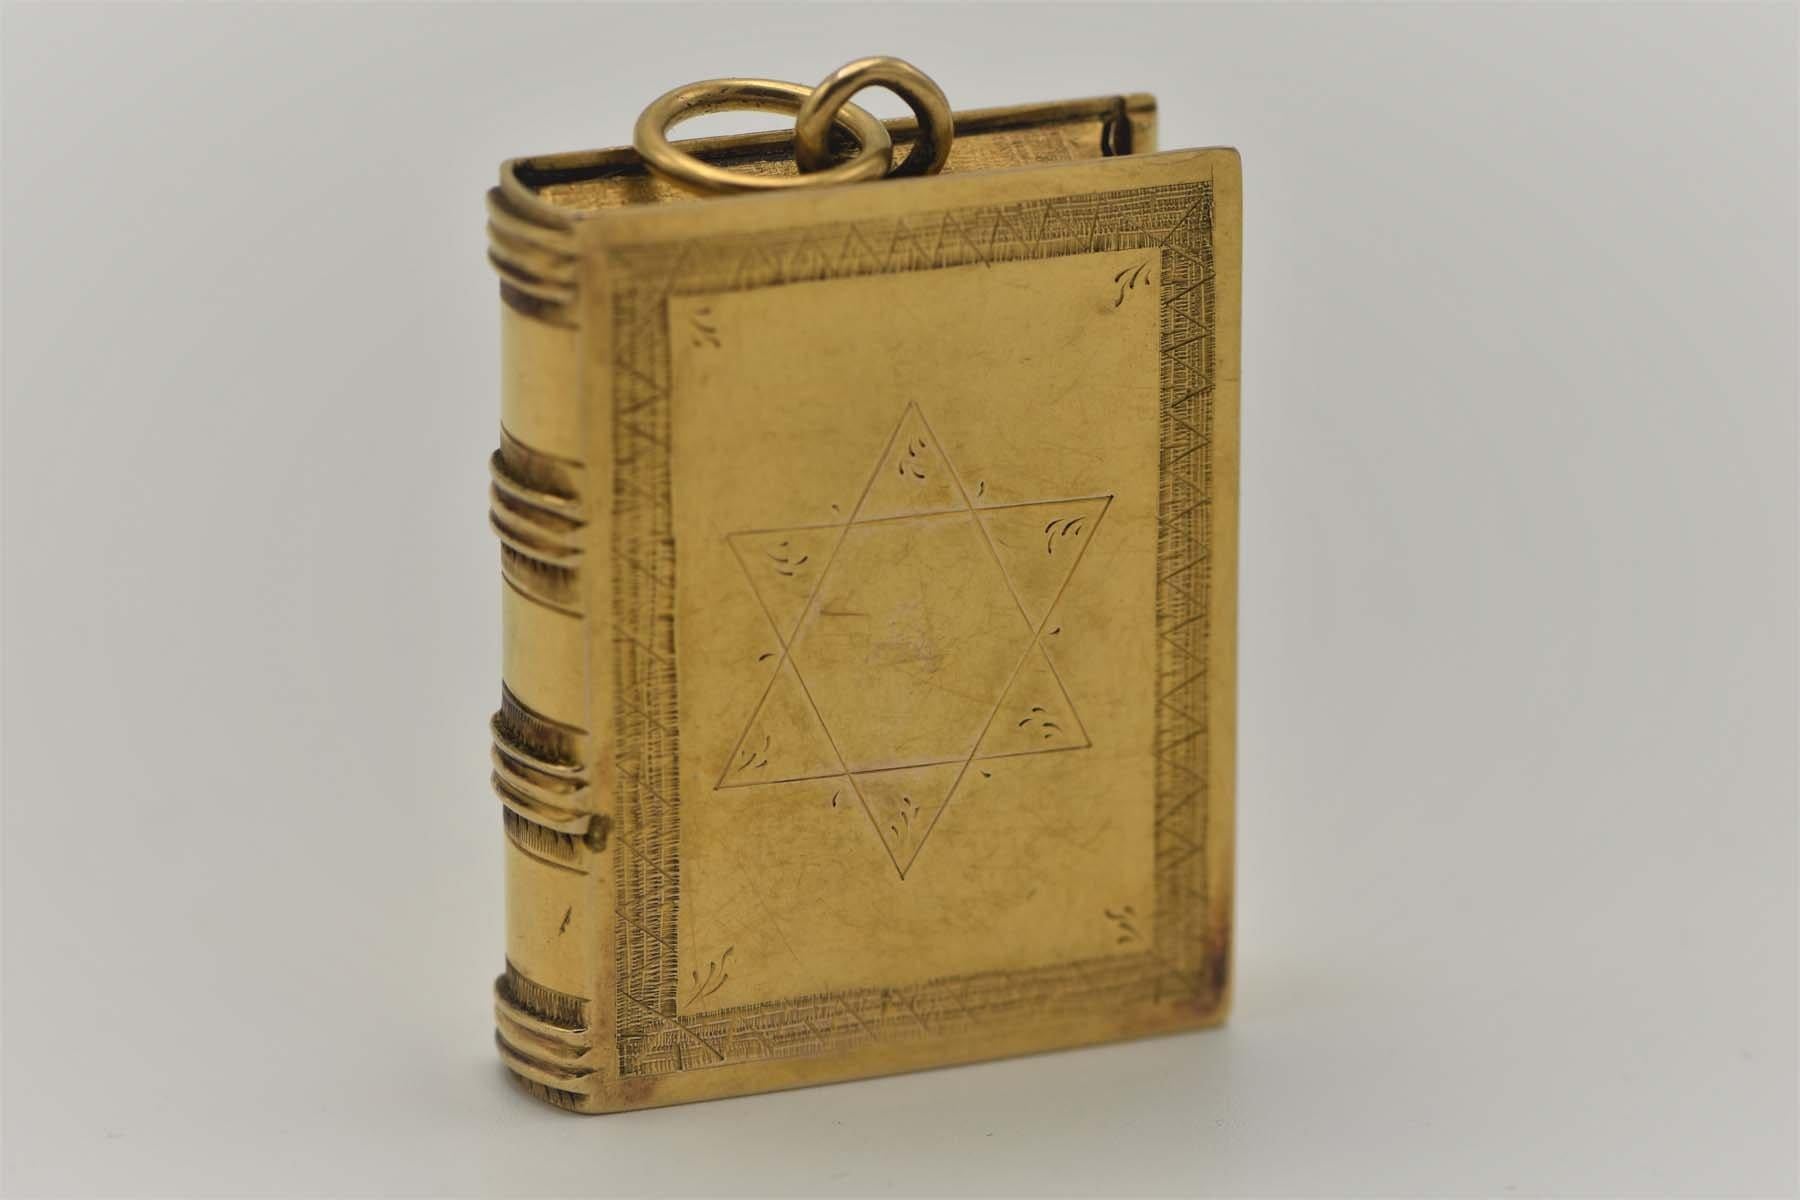 Engraved Early 19th Century Dutch Gold Jewish Amulet Case with Hebrew Parchment